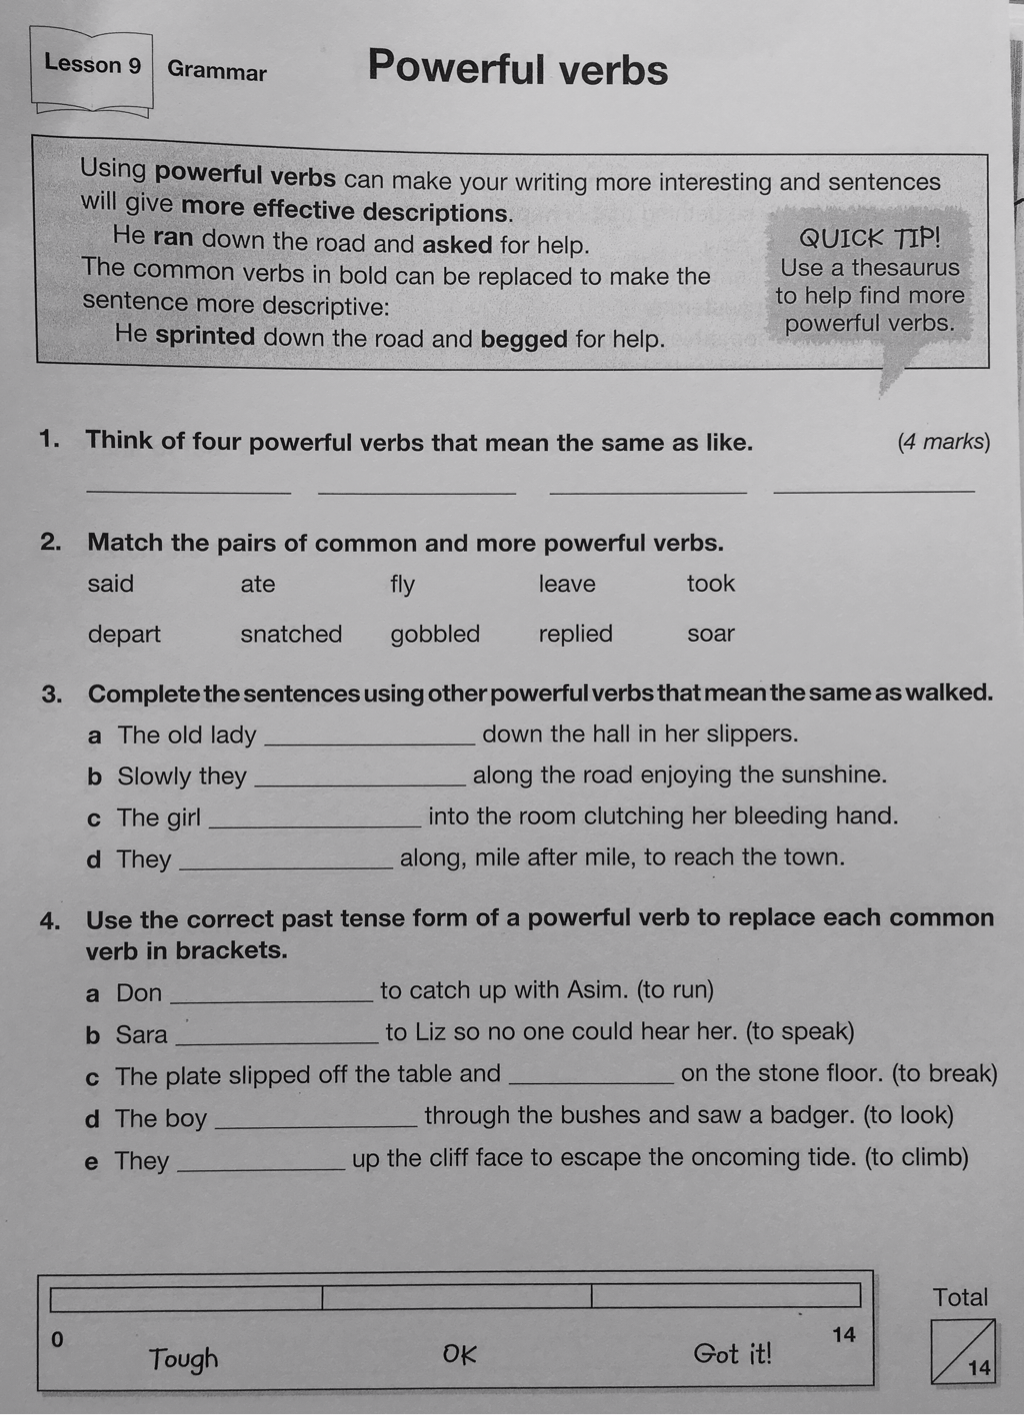 Powerful Verbs Worksheets For Grade 5